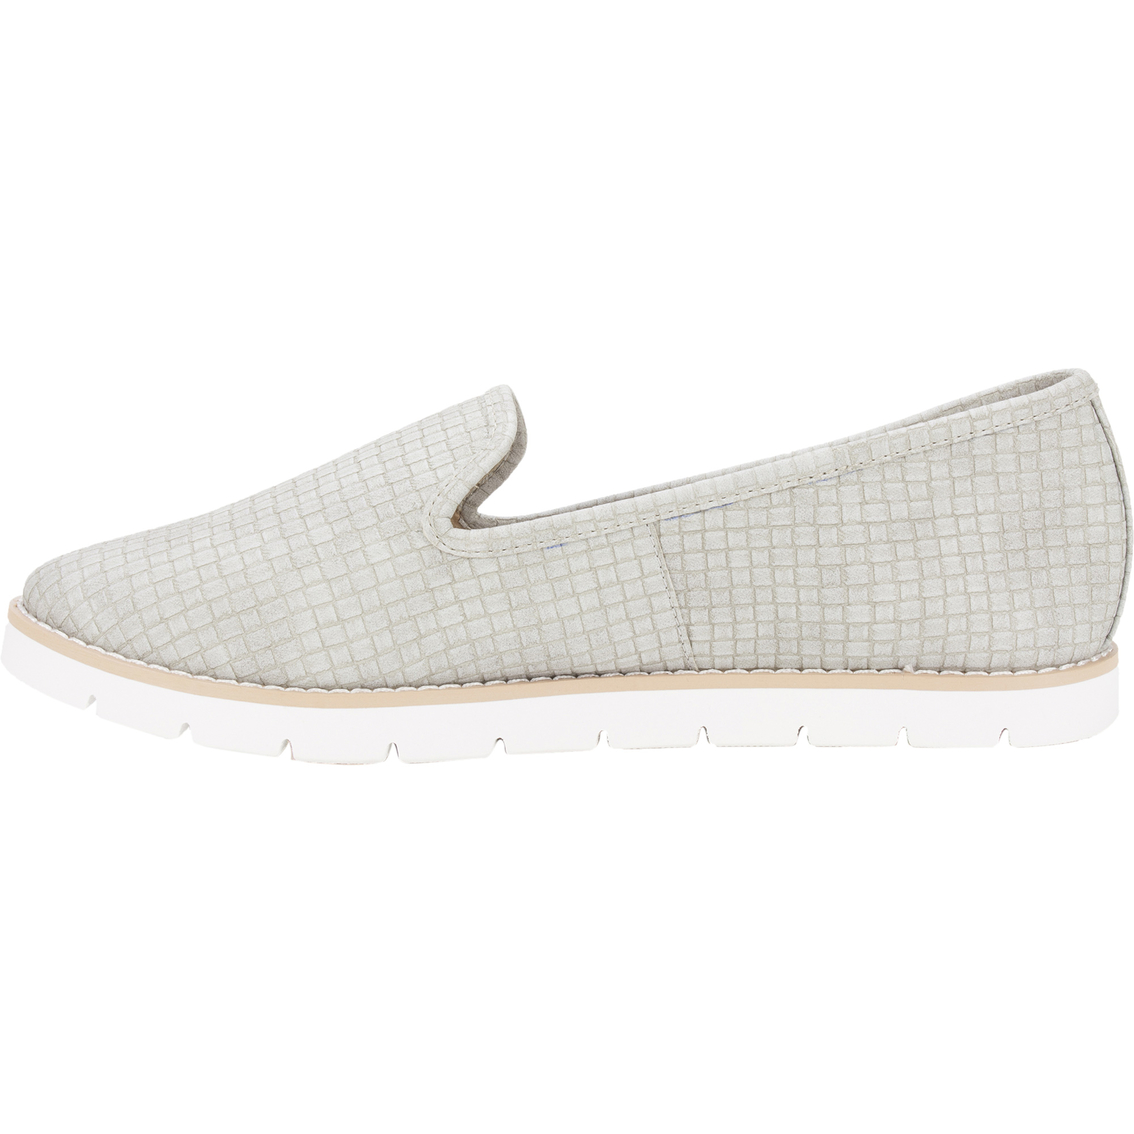 White Mountain Women's Denny Comfort Slip On Shoes - Image 3 of 5